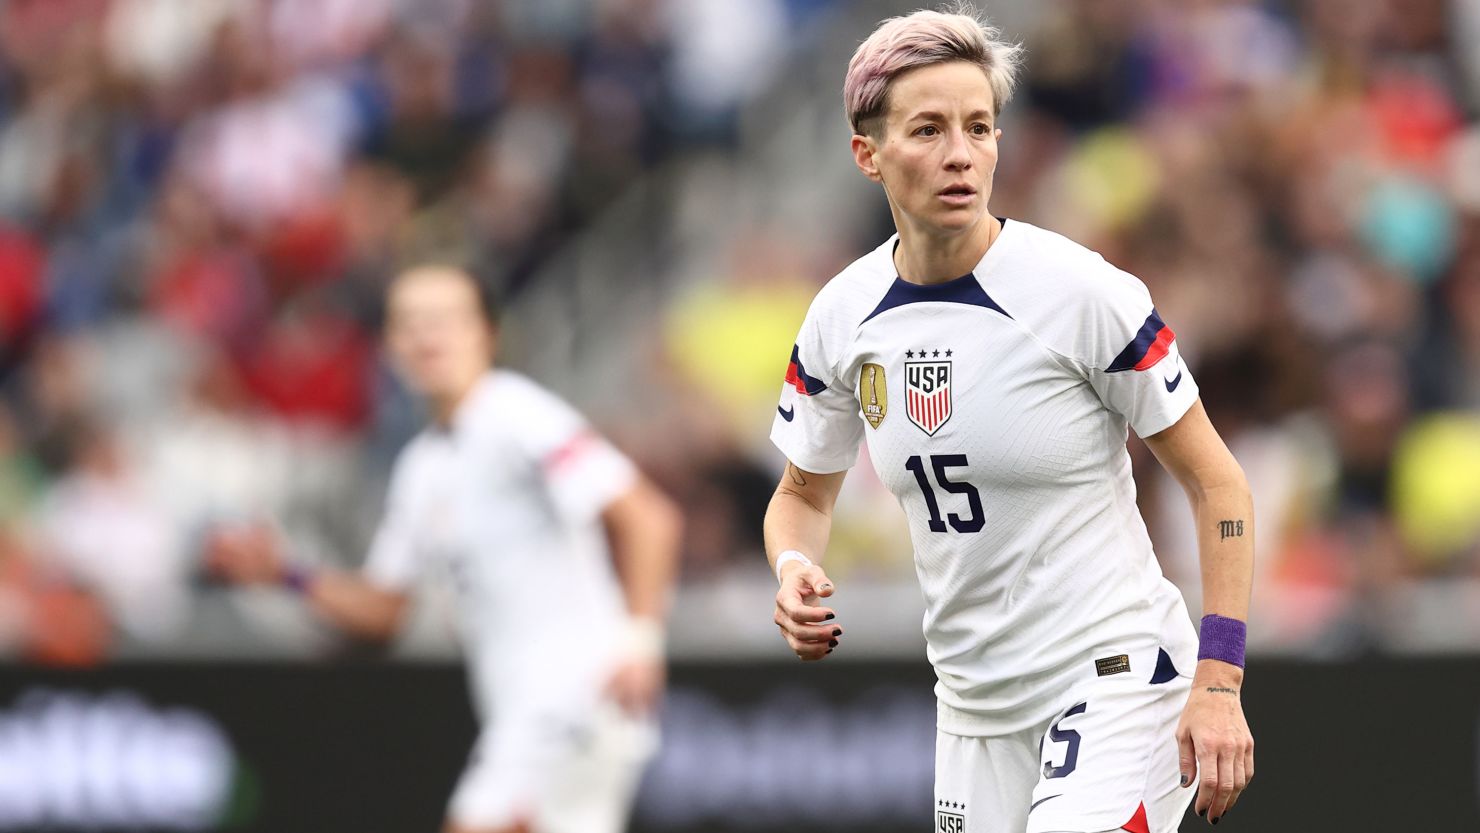 NASHVILLE, TN - FEBRUARY 19: Megan Rapinoe of United States during the 2023 SheBelieves Cup match between Japan and United States at GEODIS Park on February 19, 2023 in Nashville, Tennessee. (Photo by James Williamson/AMA/Getty Images)